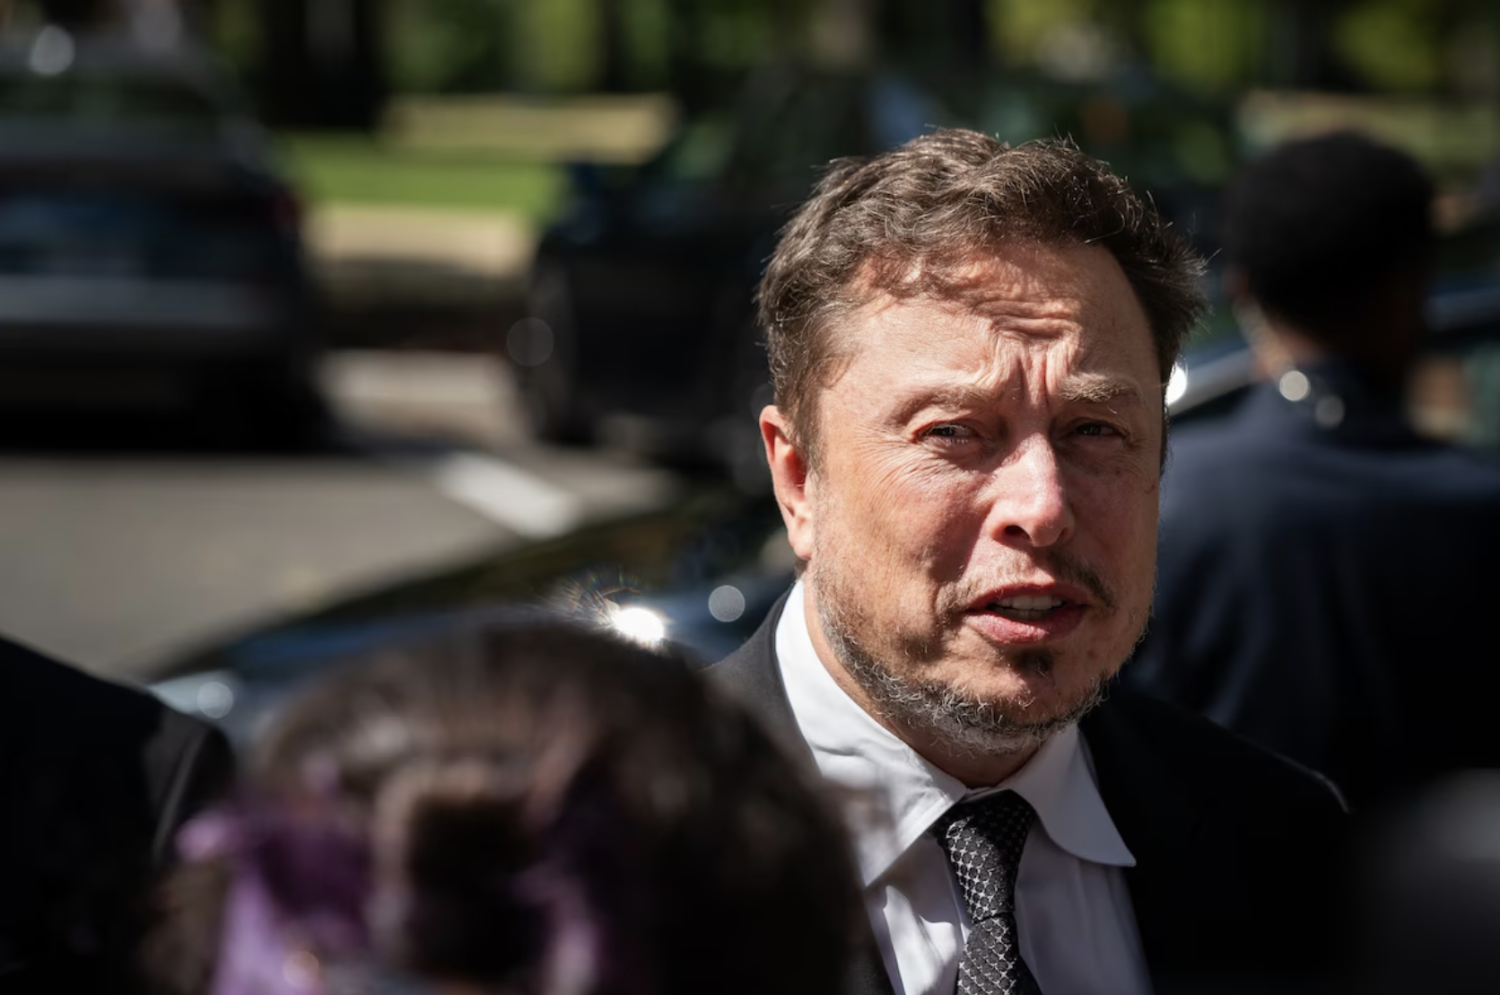 Elon Musk speaks to reporters as he leaves a Senate bipartisan Artificial Intelligence Insight Forum on Capitol Hill in Washington on Sept. 13. (Elizabeth Frantz for The Washington Post)